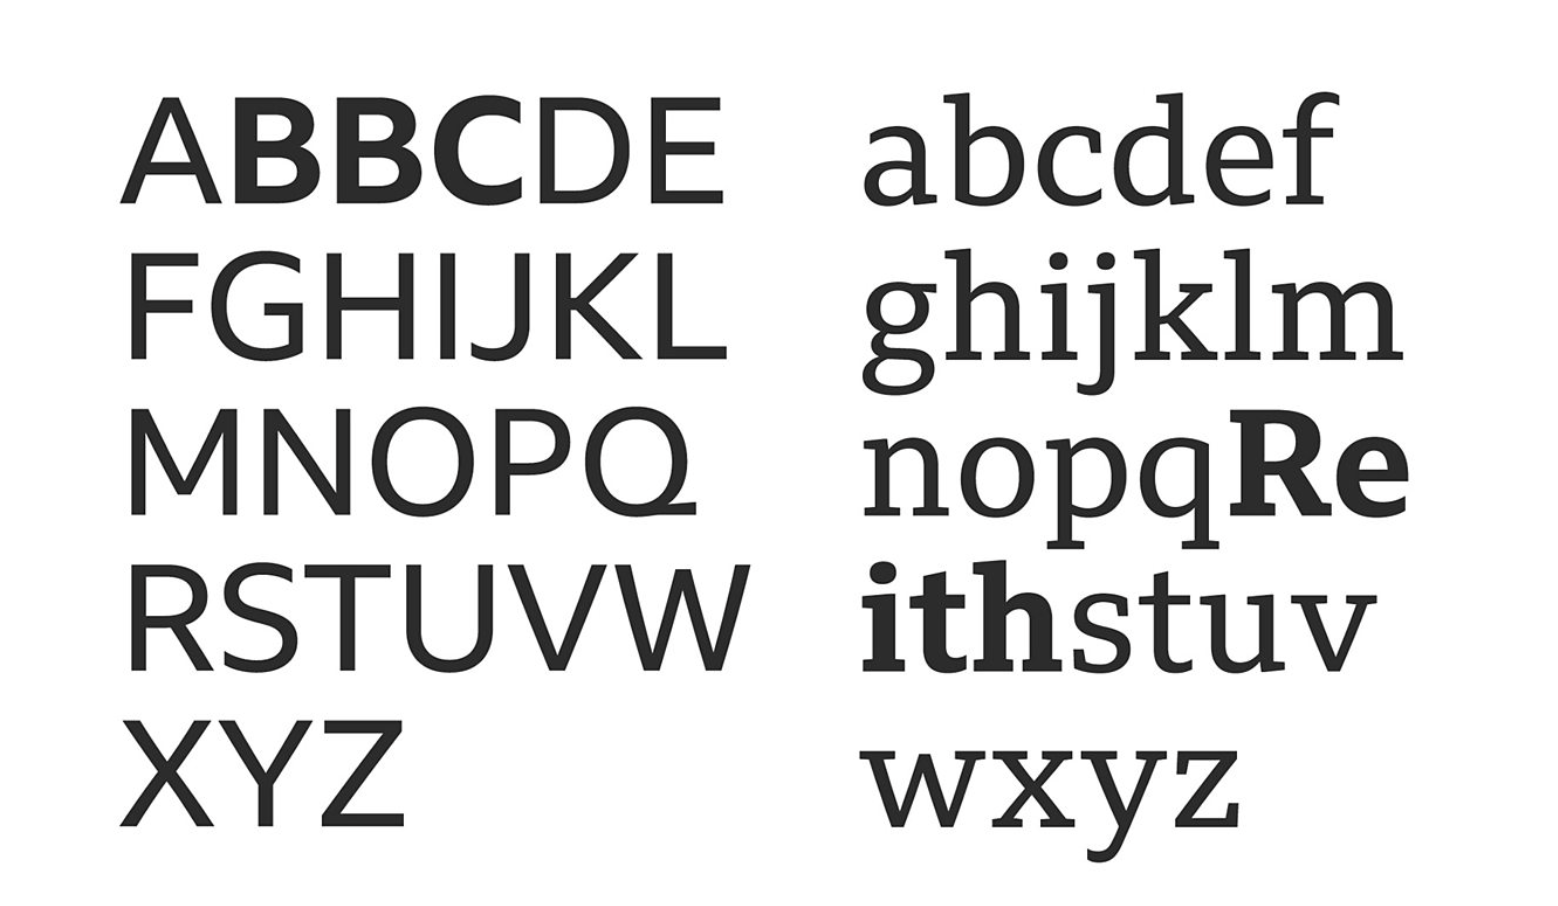 A screenshot from the BBC's website showing characters in its Reith font in upper and lower case